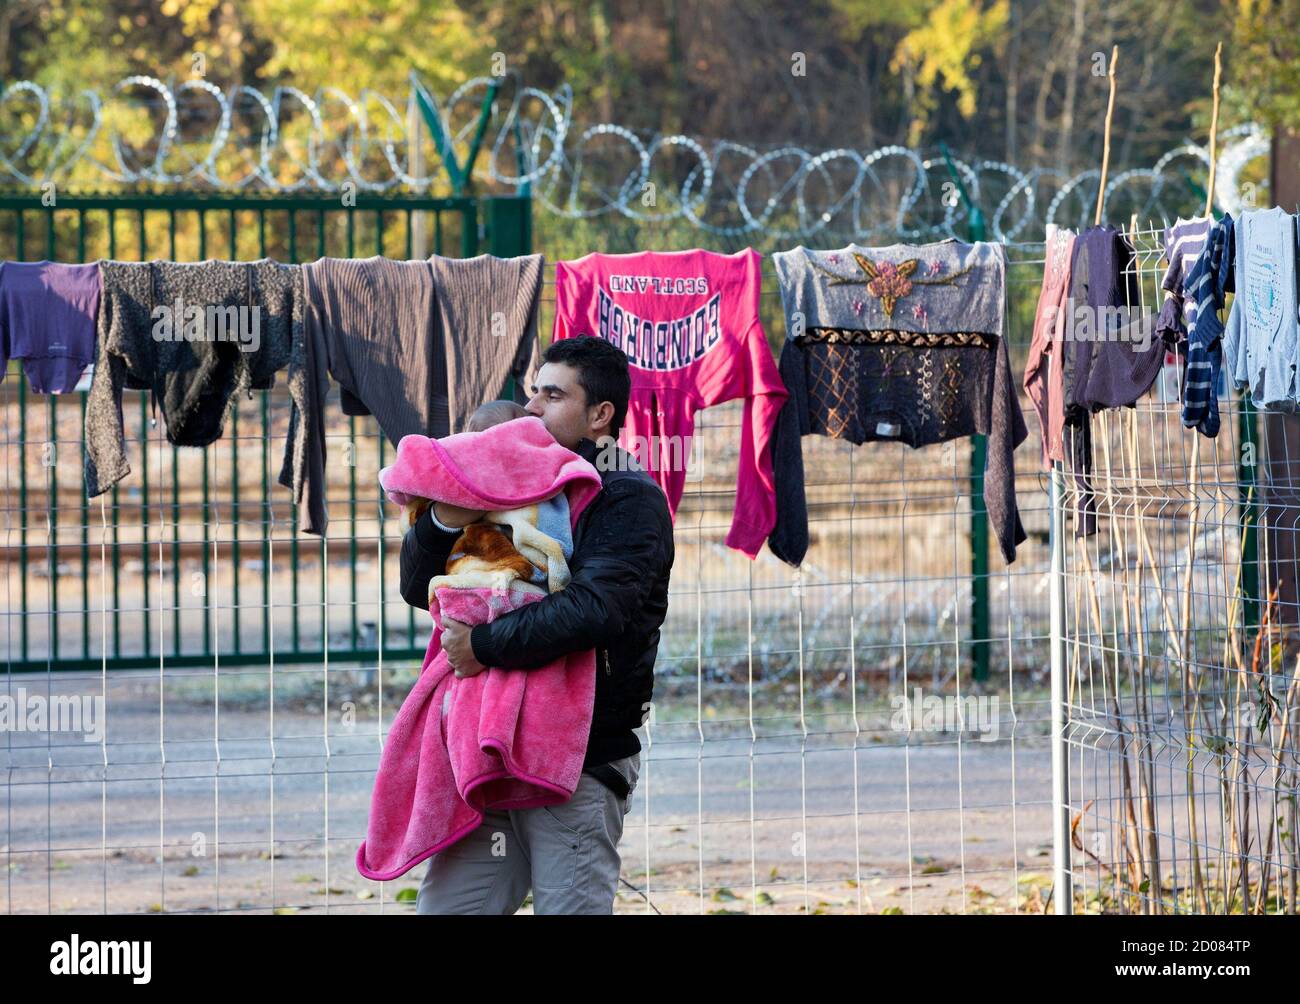 A man holds his child as he walks inside a camp for Albanian and Eastern European asylum seekers in Oullins near Lyon, southeastern France, November 28, 2013. Families live in temporary prefabricated housing set-up by French authorities after they were evacuated from an illegal camp under the A6 motorway in Lyon.   REUTERS/Robert Pratta  (FRANCE - Tags: SOCIETY IMMIGRATION POLITICS) Stock Photo